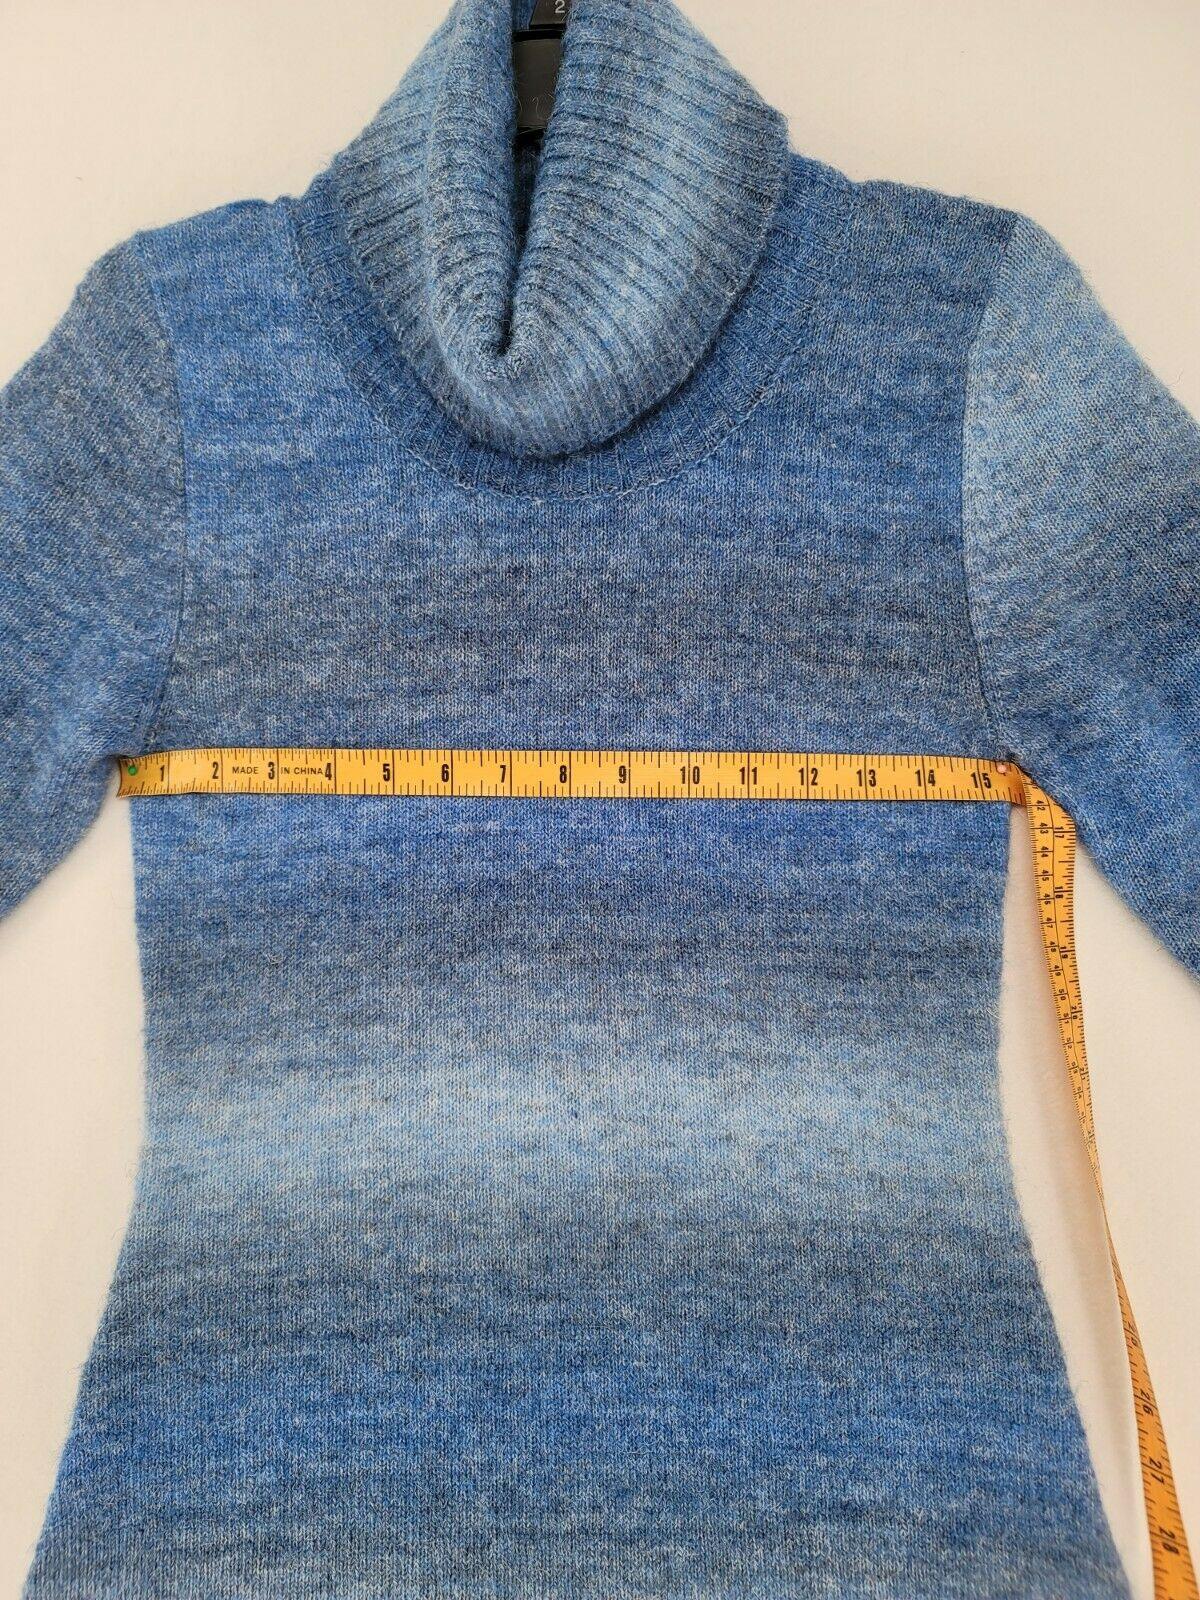 RONNI NICOLE  Blue Ombre Knit Sweater Dress Size S - SVNYFancy